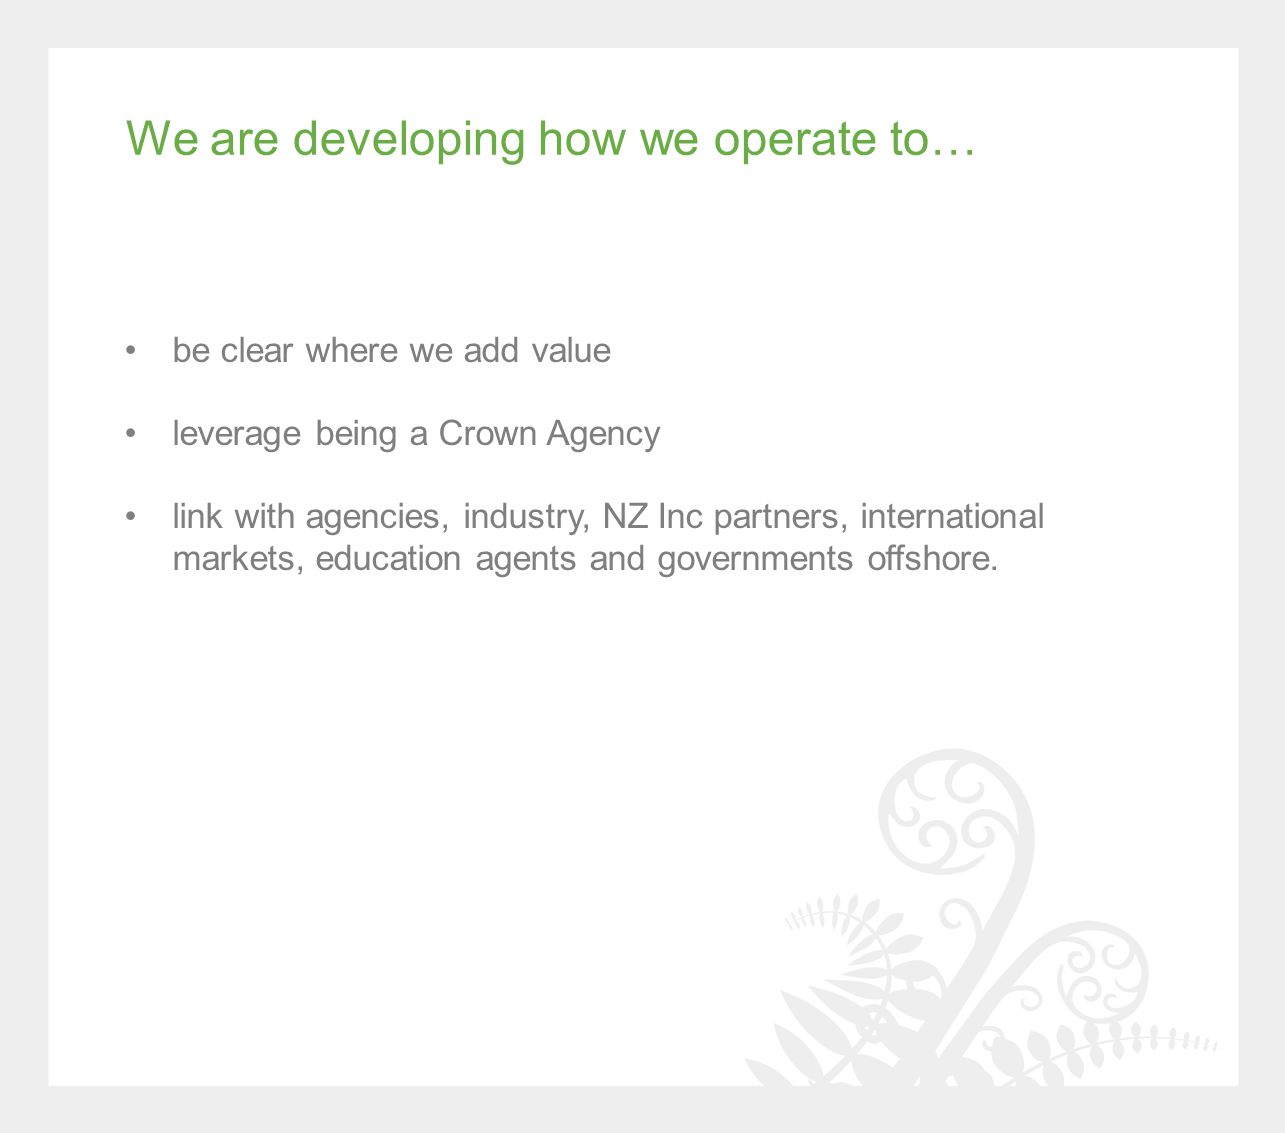 We are developing how we operate to… be clear where we add value leverage being a Crown Agency link with agencies, industry, NZ Inc partners, international markets, education agents and governments offshore.